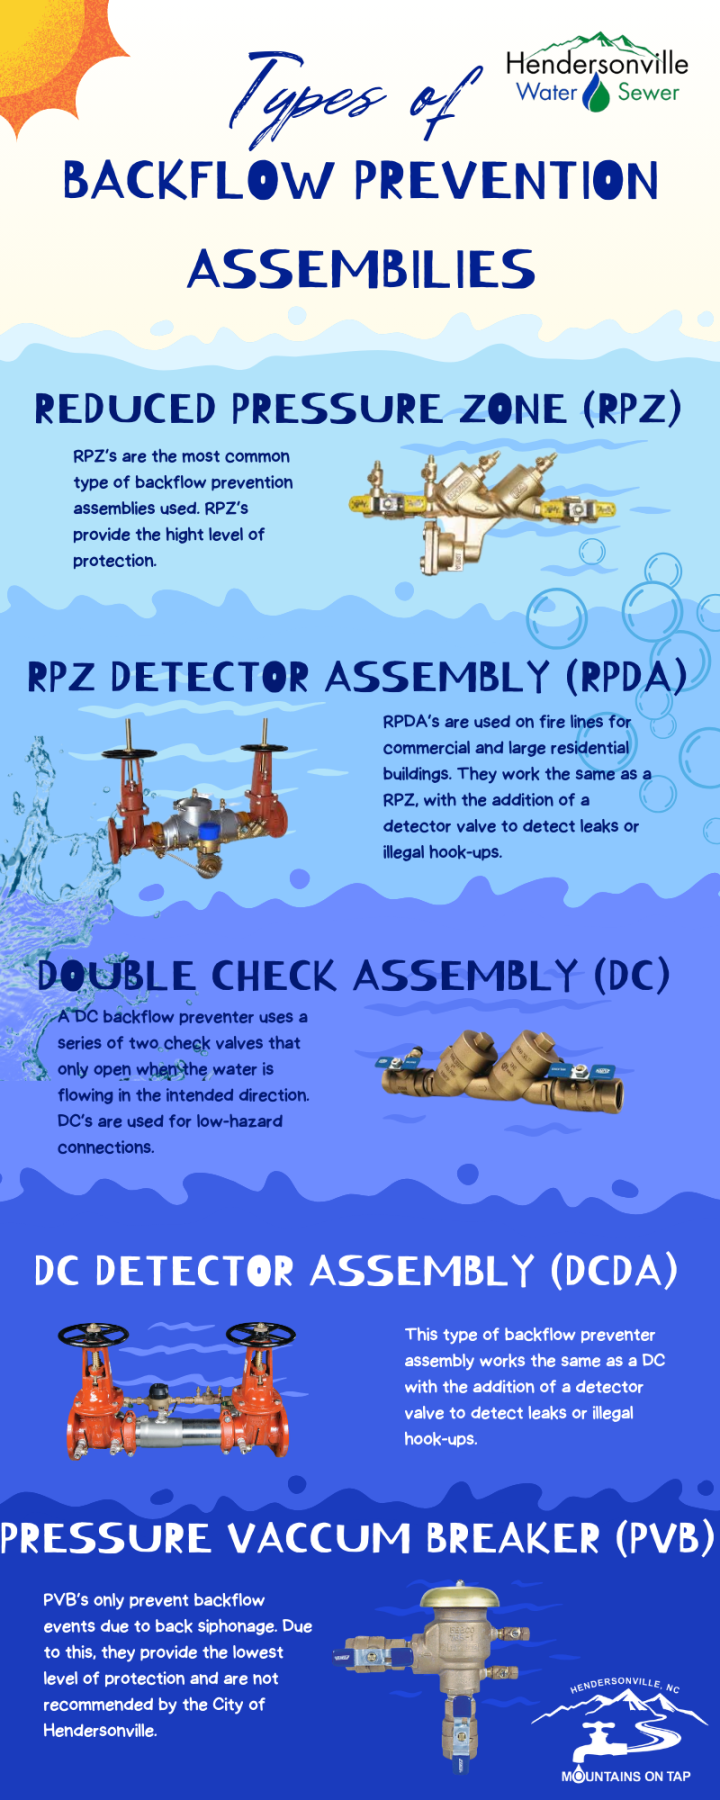 Infographic showing the different types of backflow prevention assemblies